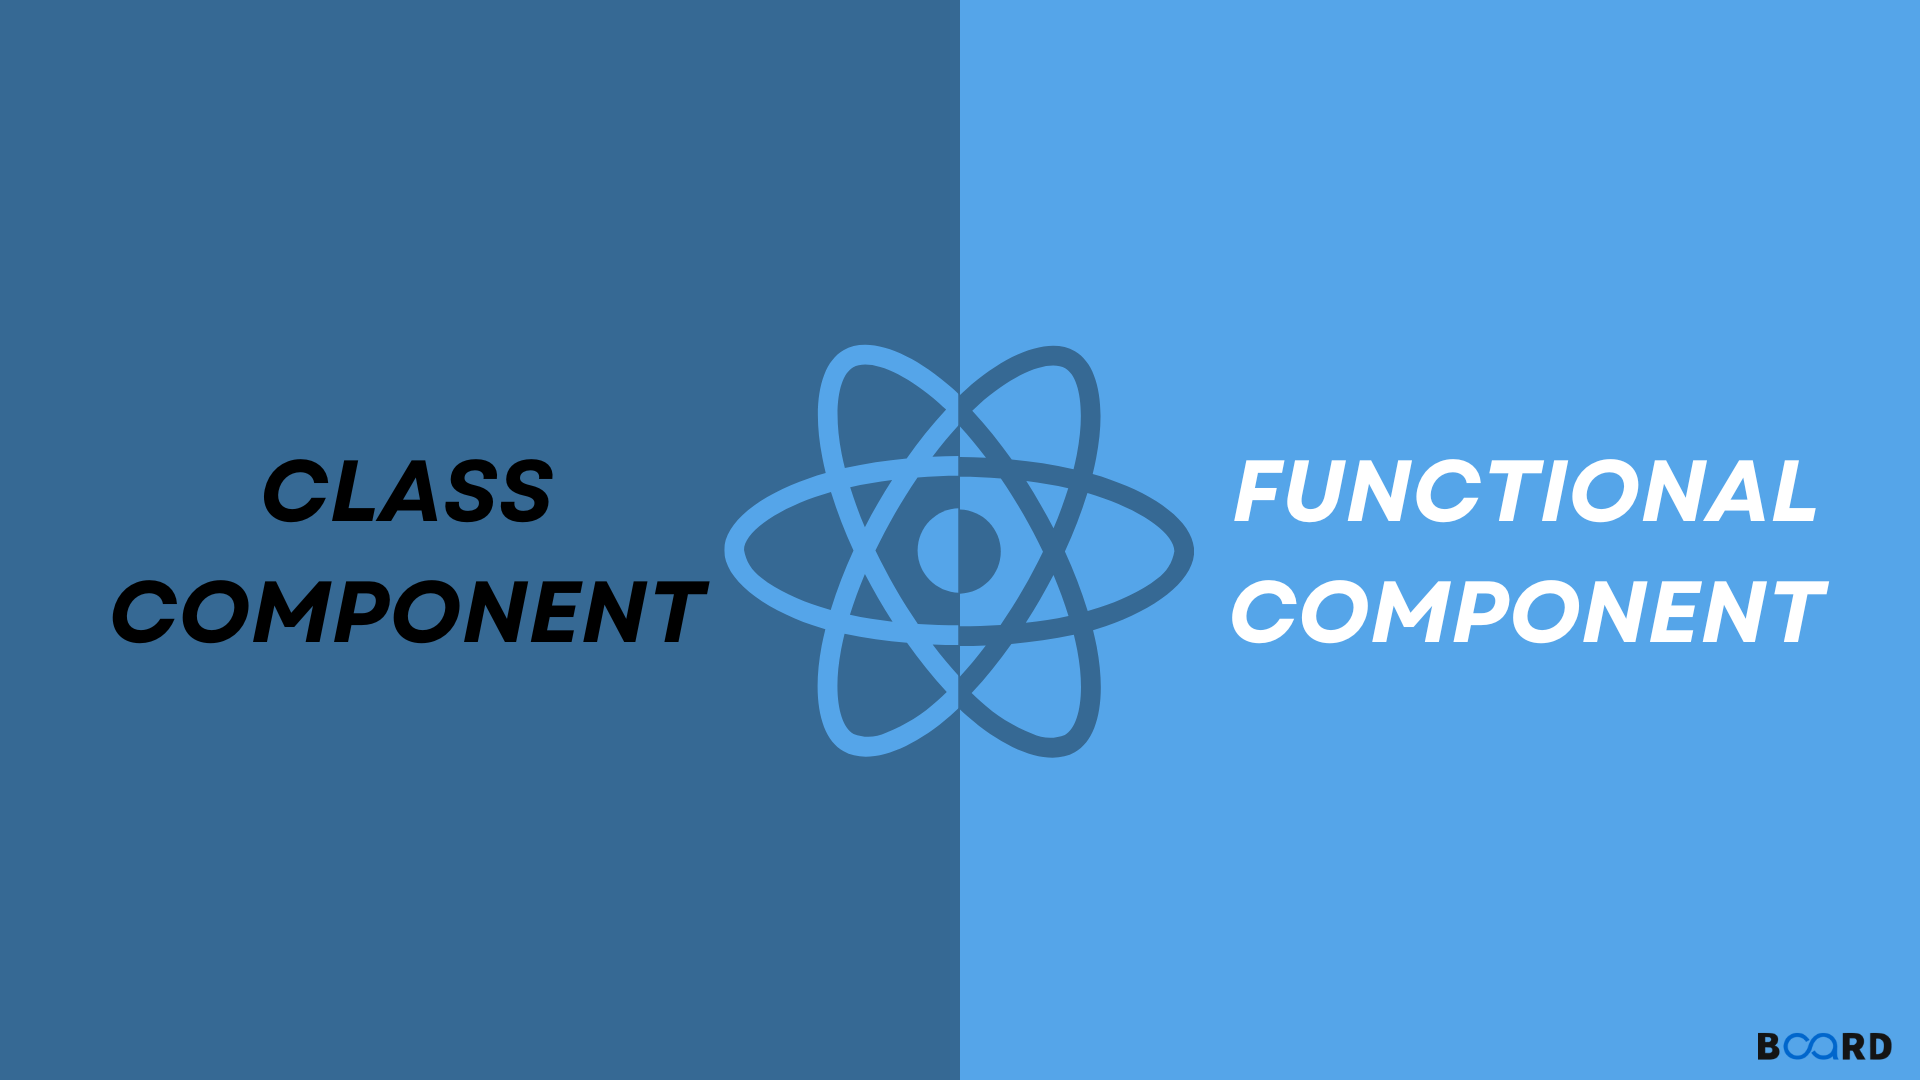 Class Component vs Functional Component: What's the Difference?